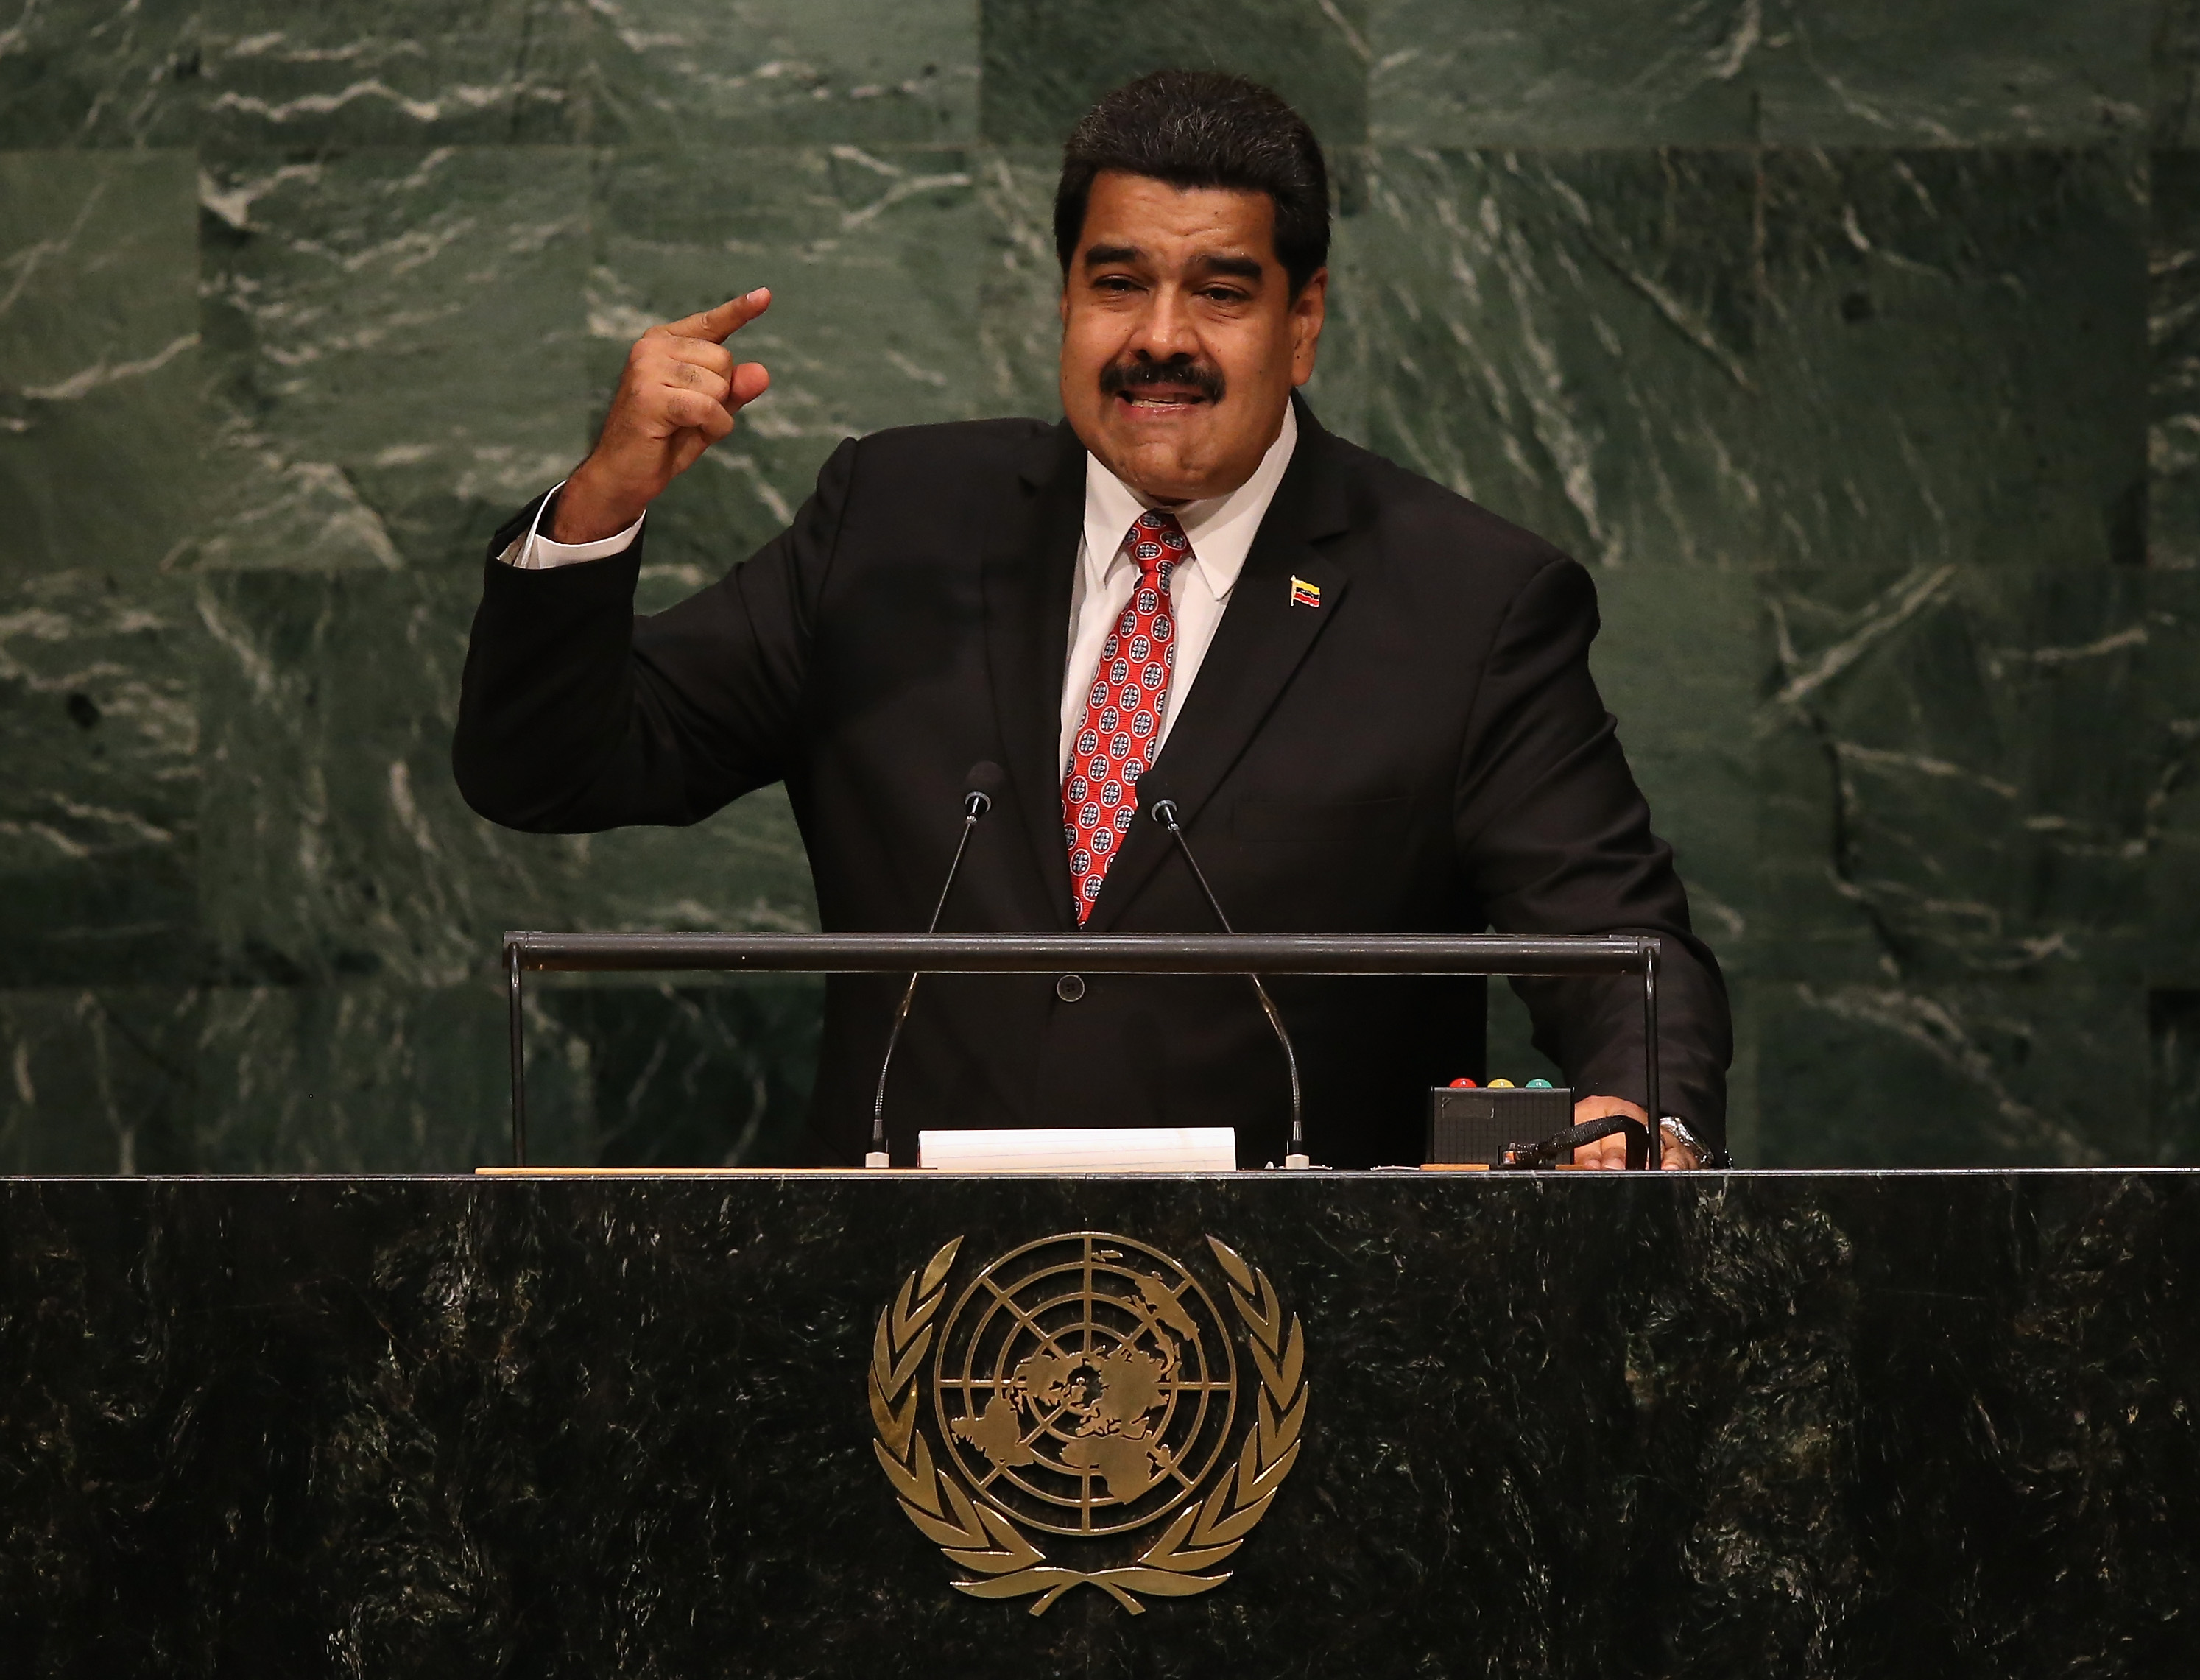 NEW YORK, NY - SEPTEMBER 29: Nicolas Maduro, President of Venezuela, addresses the United Nations General Assembly at UN headquarters on September 29, 2015 in New York City. World leaders gathered for the 70th annual UN General Assembly meeting. Maduro was holding a copy of the historic Jamaica Letter, written by revolutionary leader Simon Bolivar in 1815. (Photo by John Moore/Getty Images)